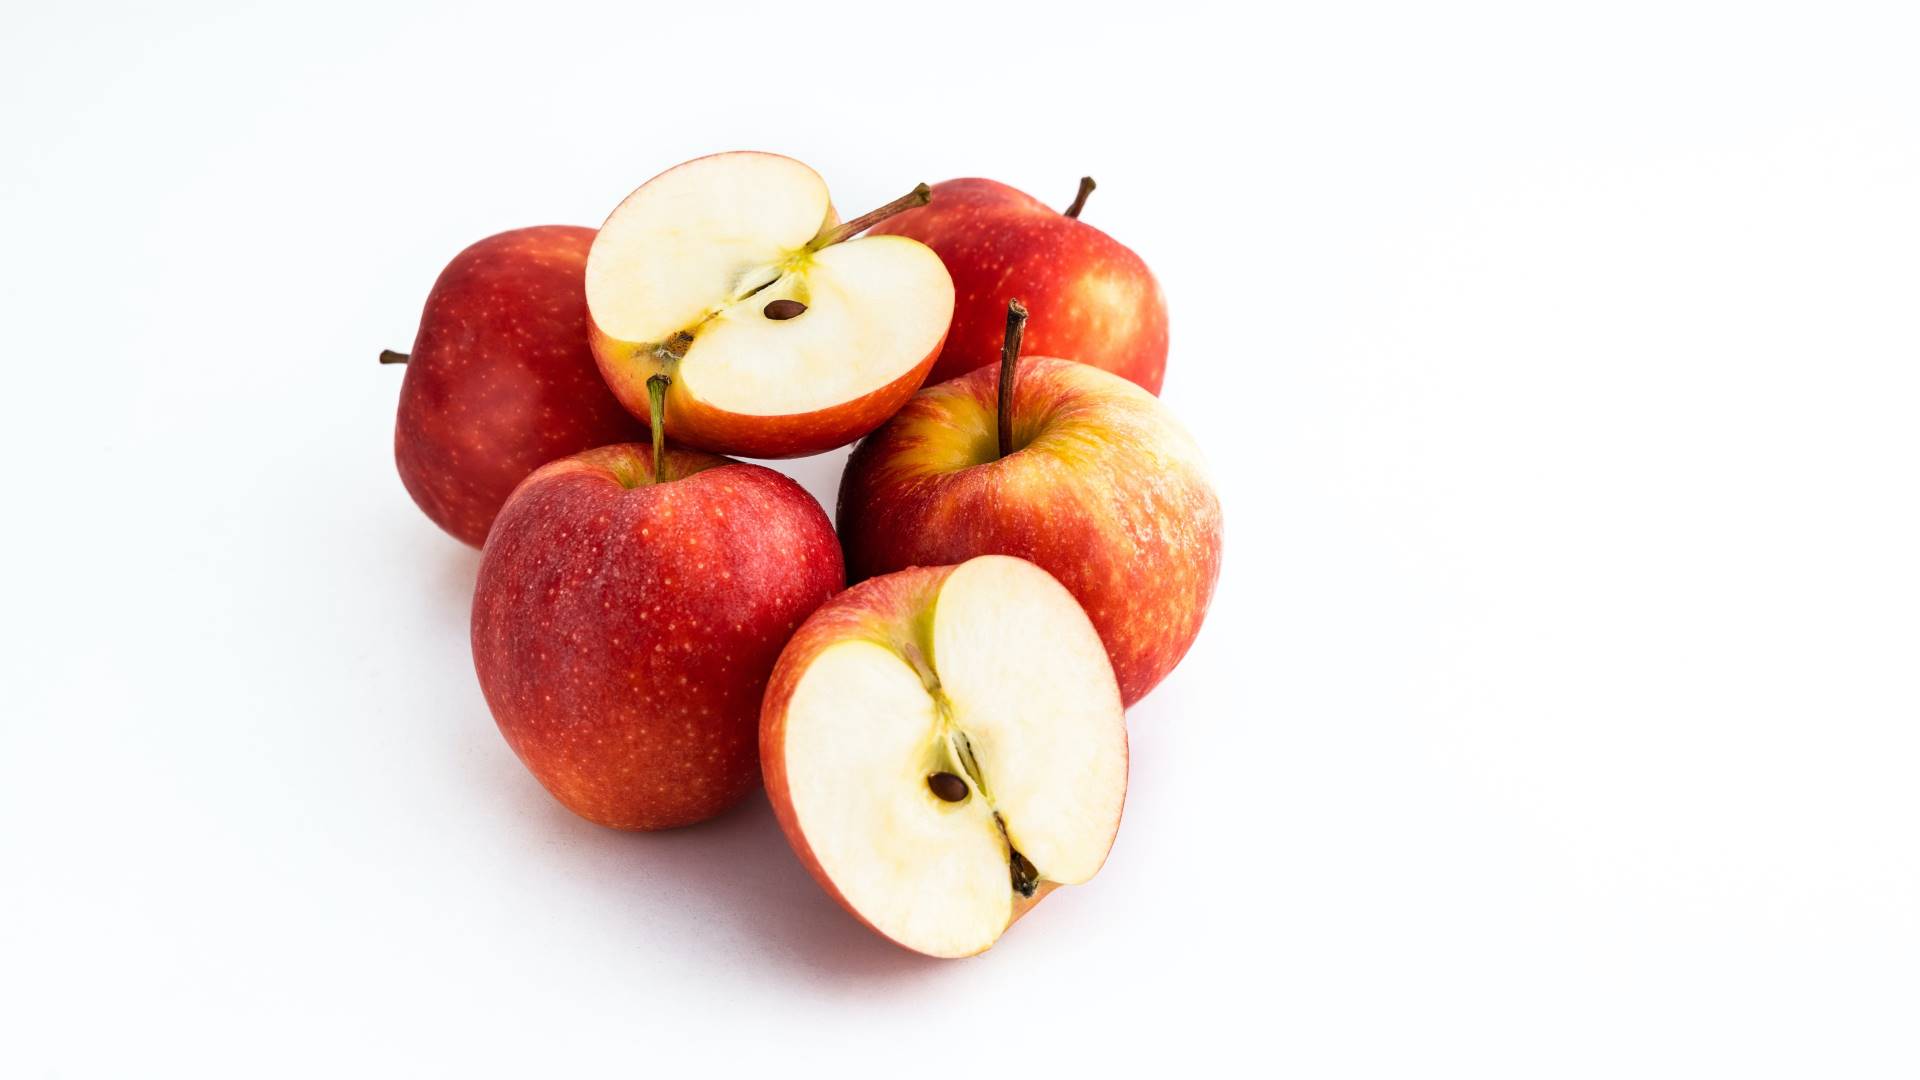 The calories in an apple depend upon its size and variety.